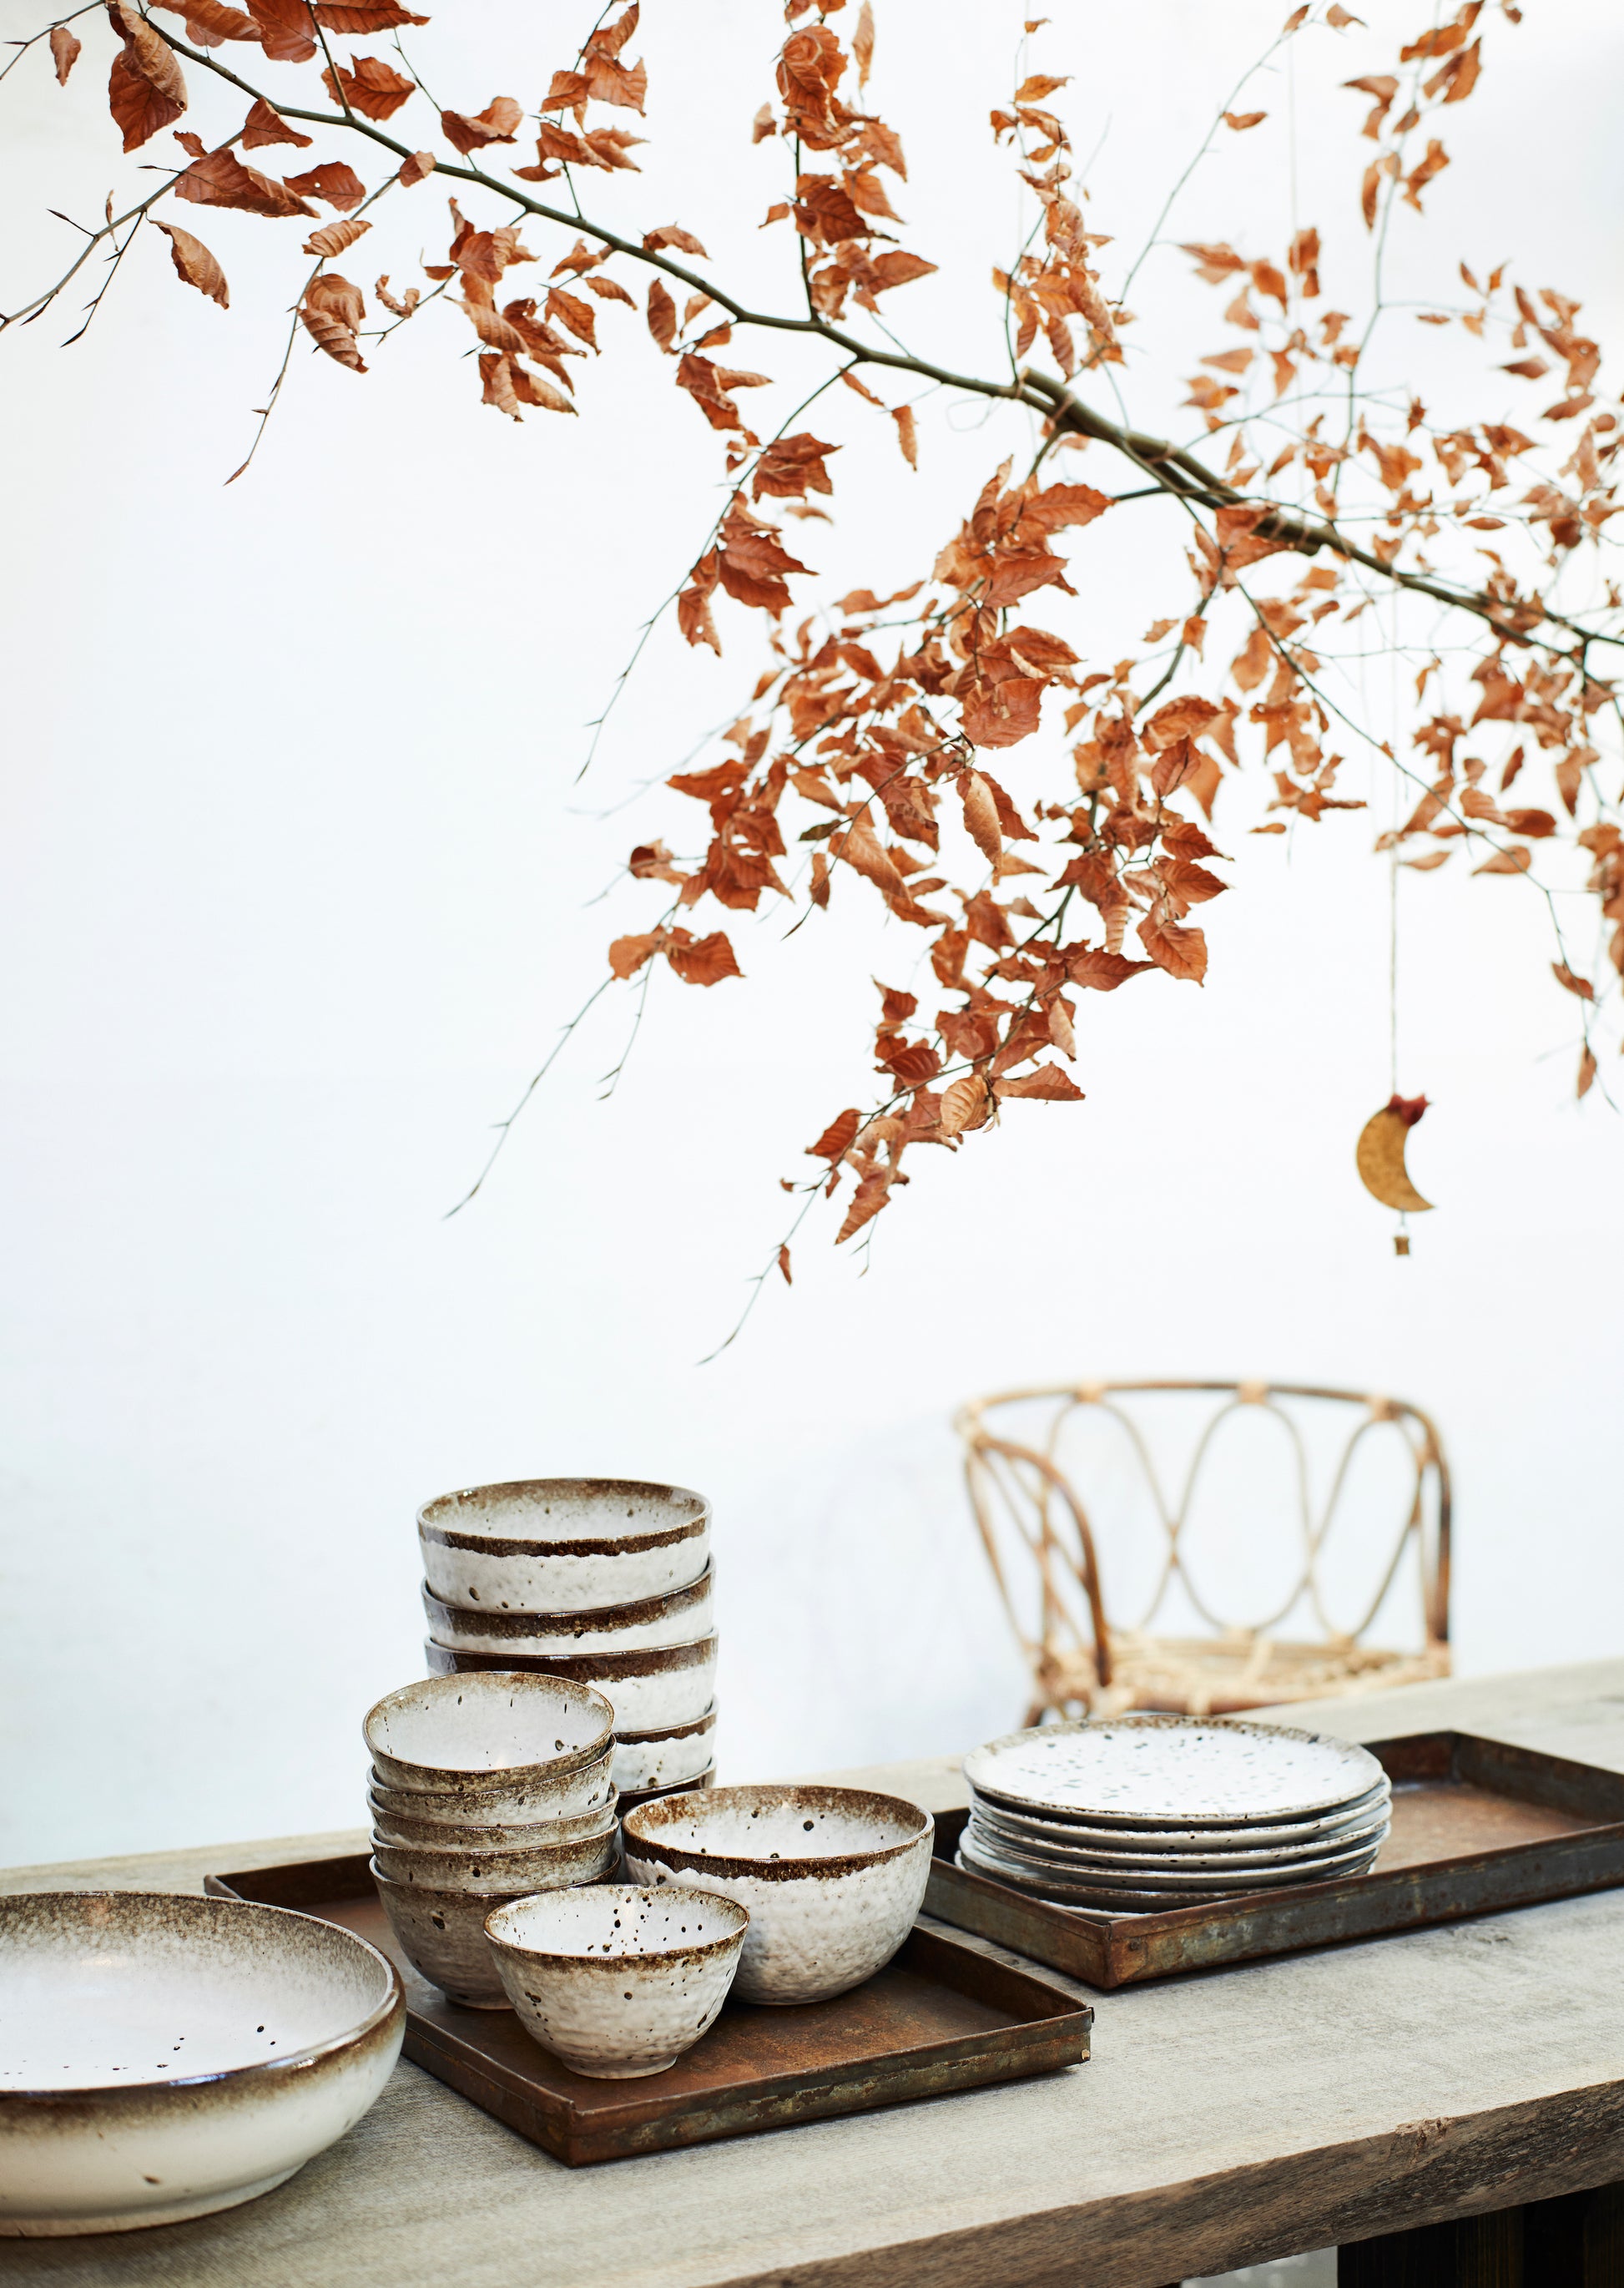 a pile of white and brown stoneware bowls and plates on wooden trays, under a tree with auburn leaves